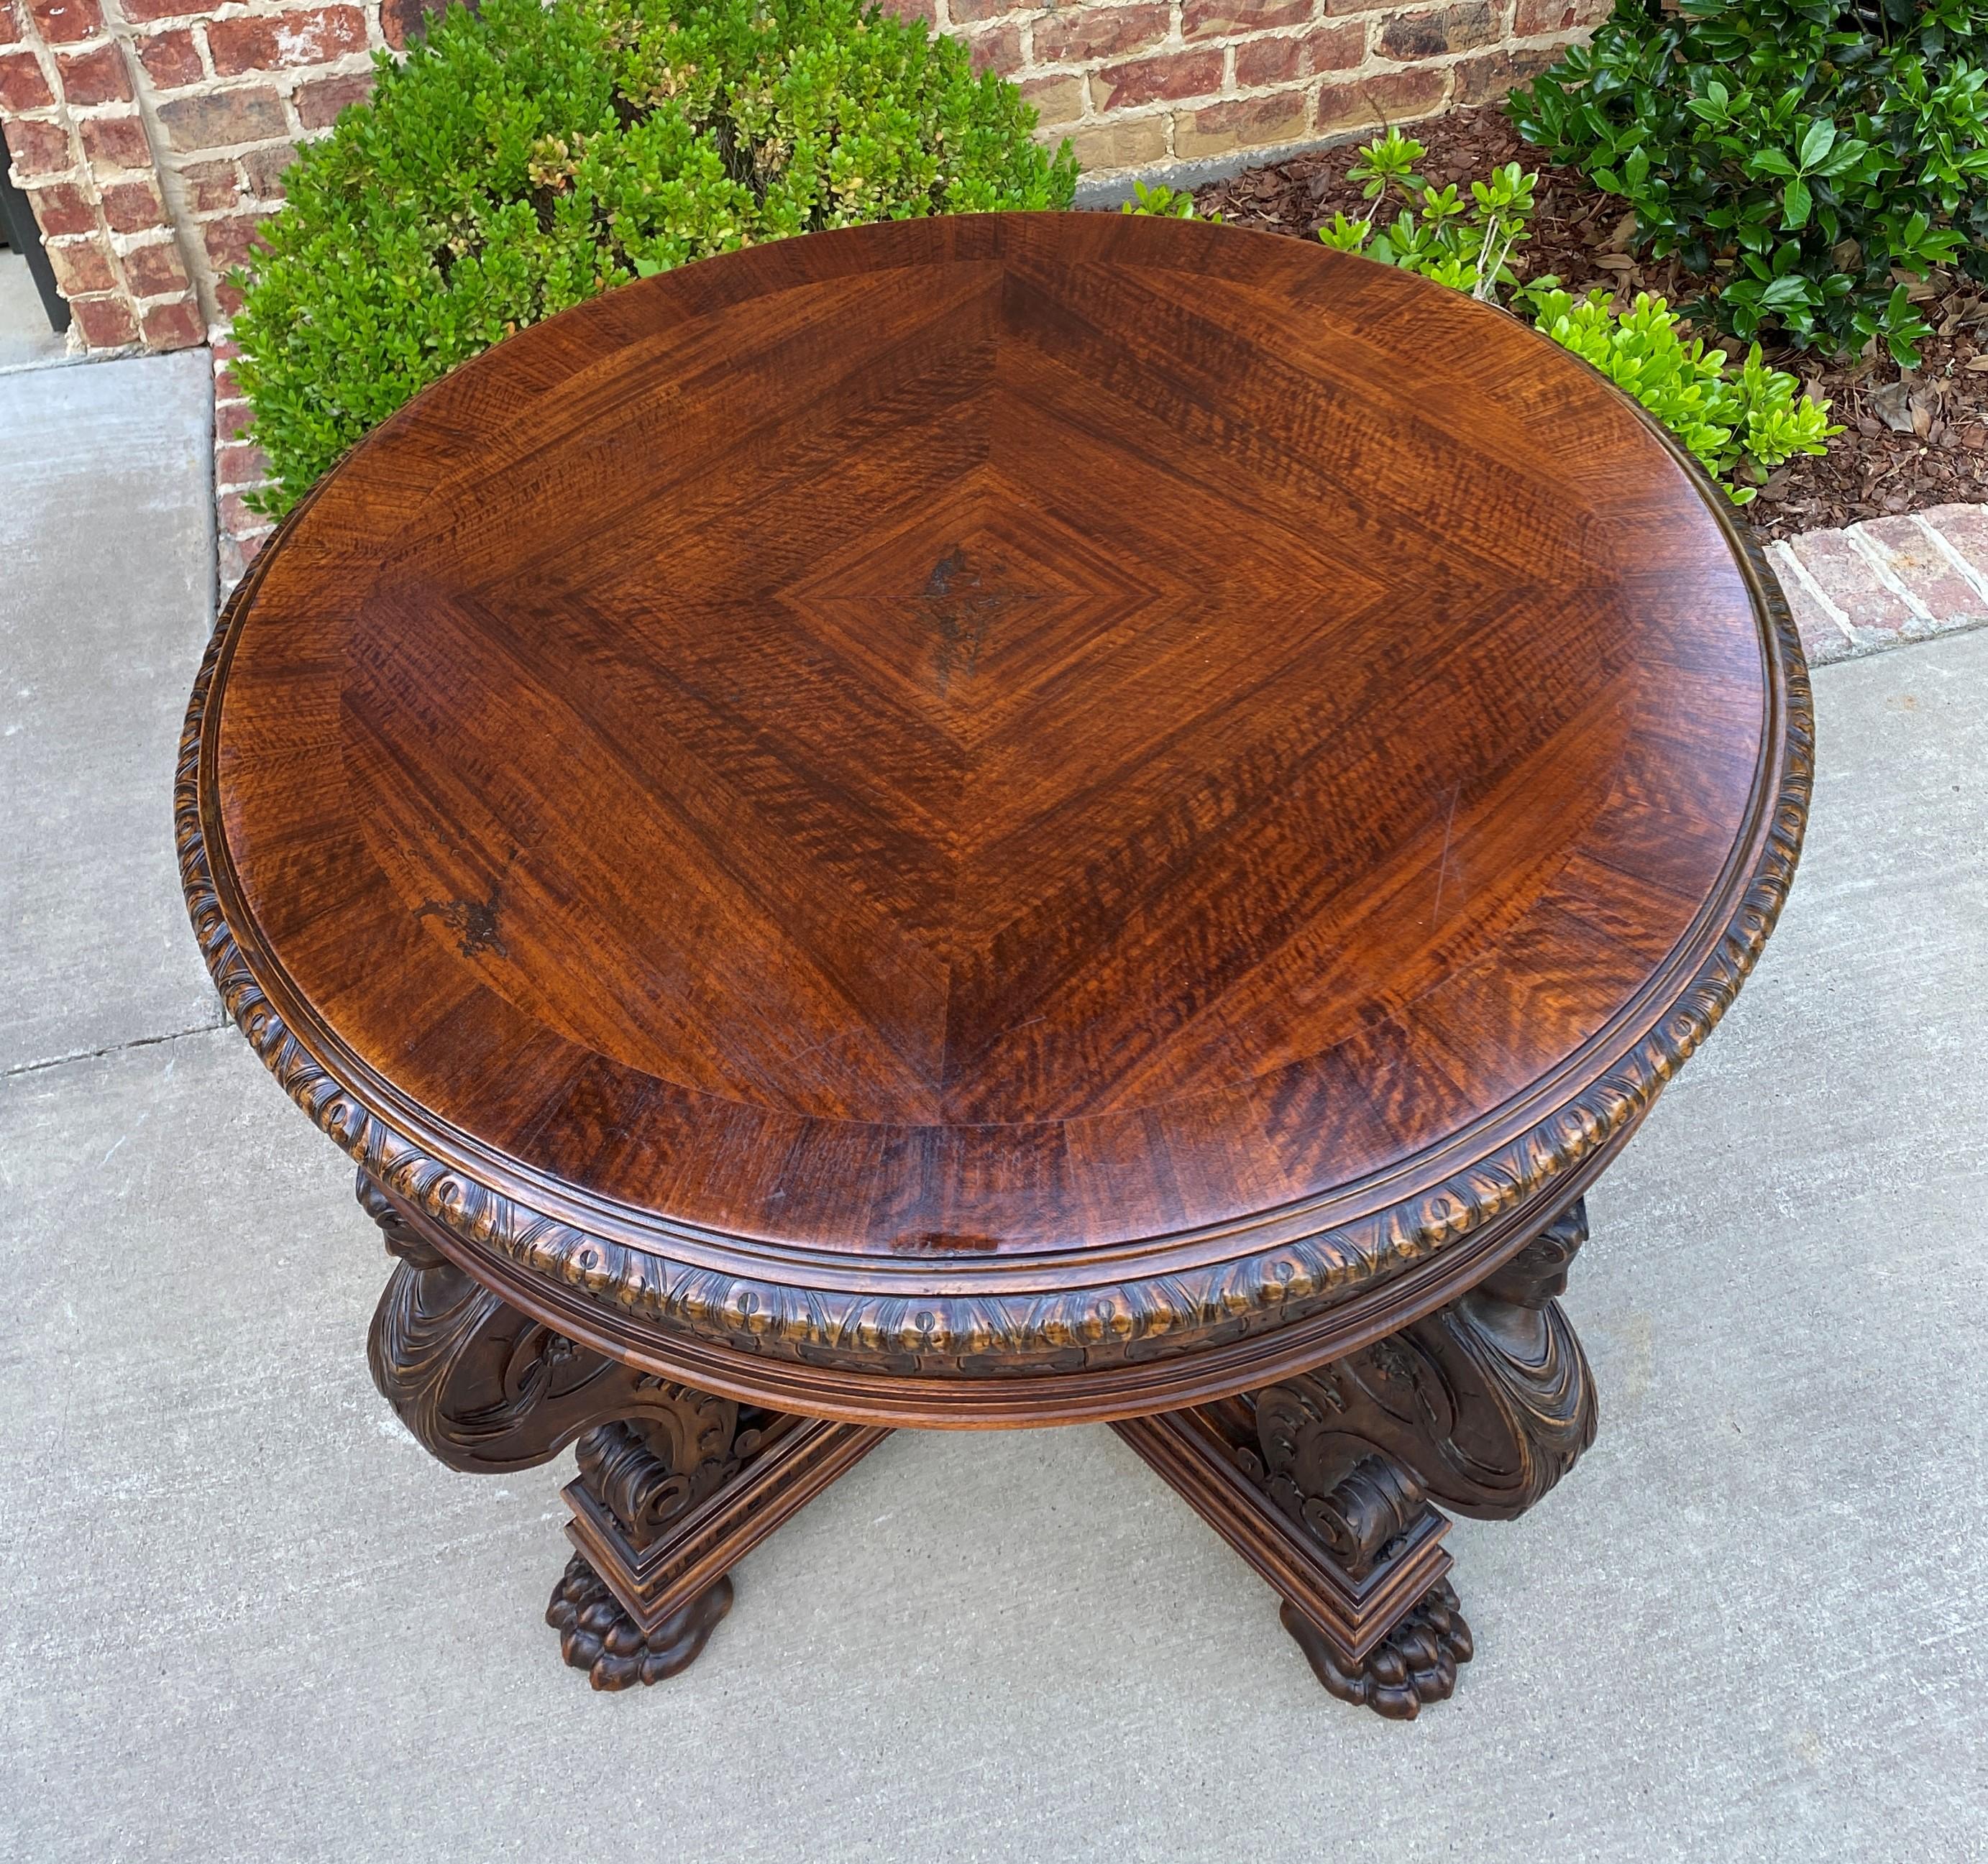 Antique French Round Table Entry Center Parlor Table Renaissance Revival 19th C 4